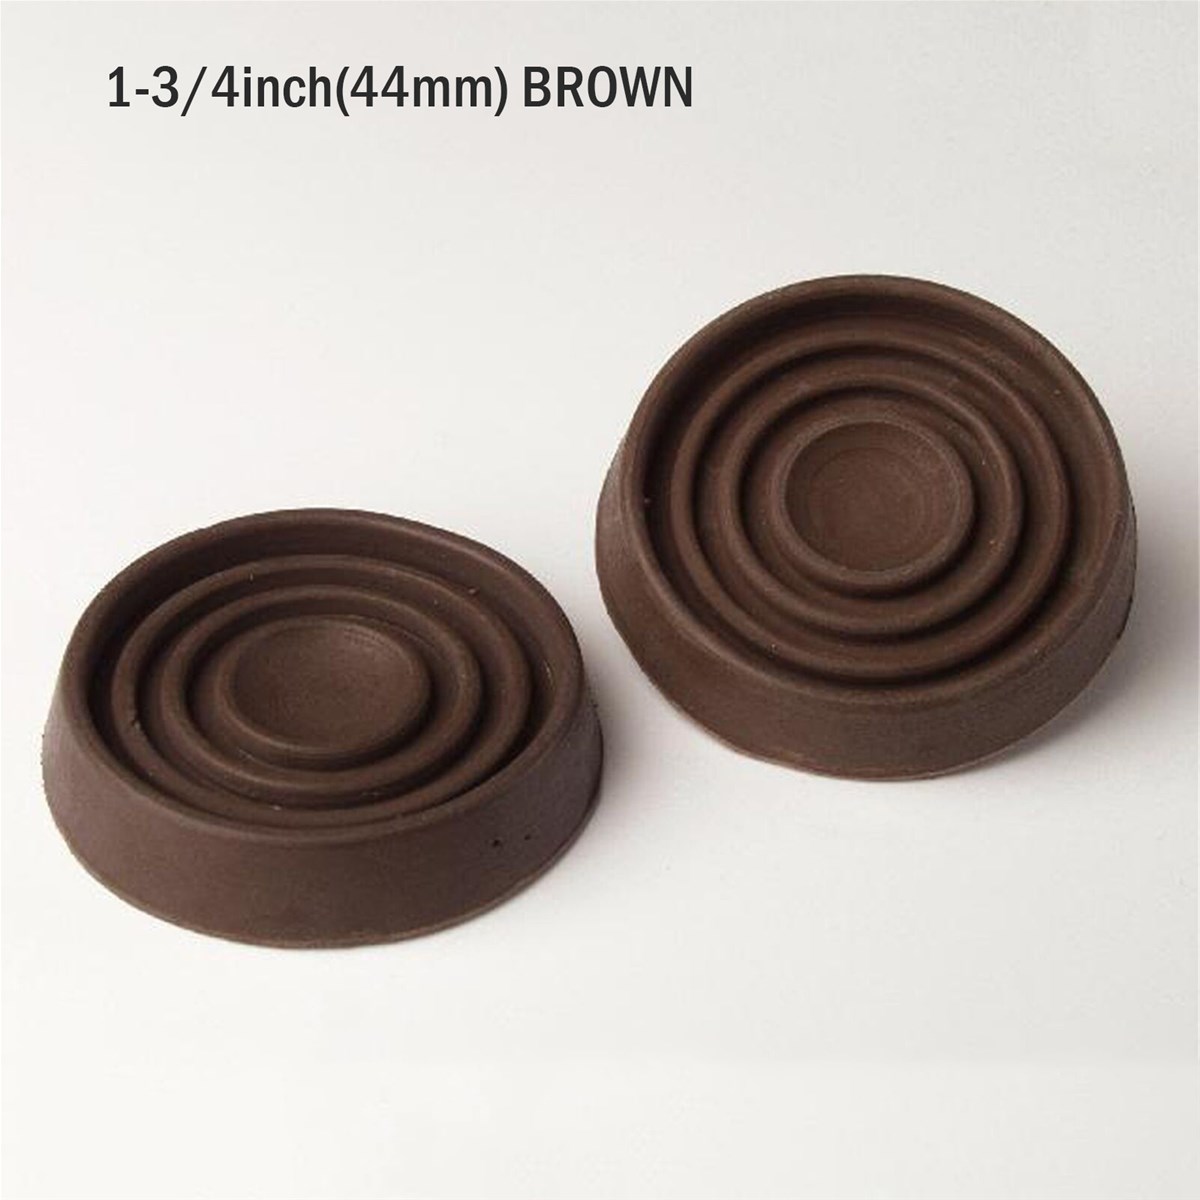 134inchROUND CASTOR CUPS Rubber Base Protects Floors BROWN 38 Or 44mm